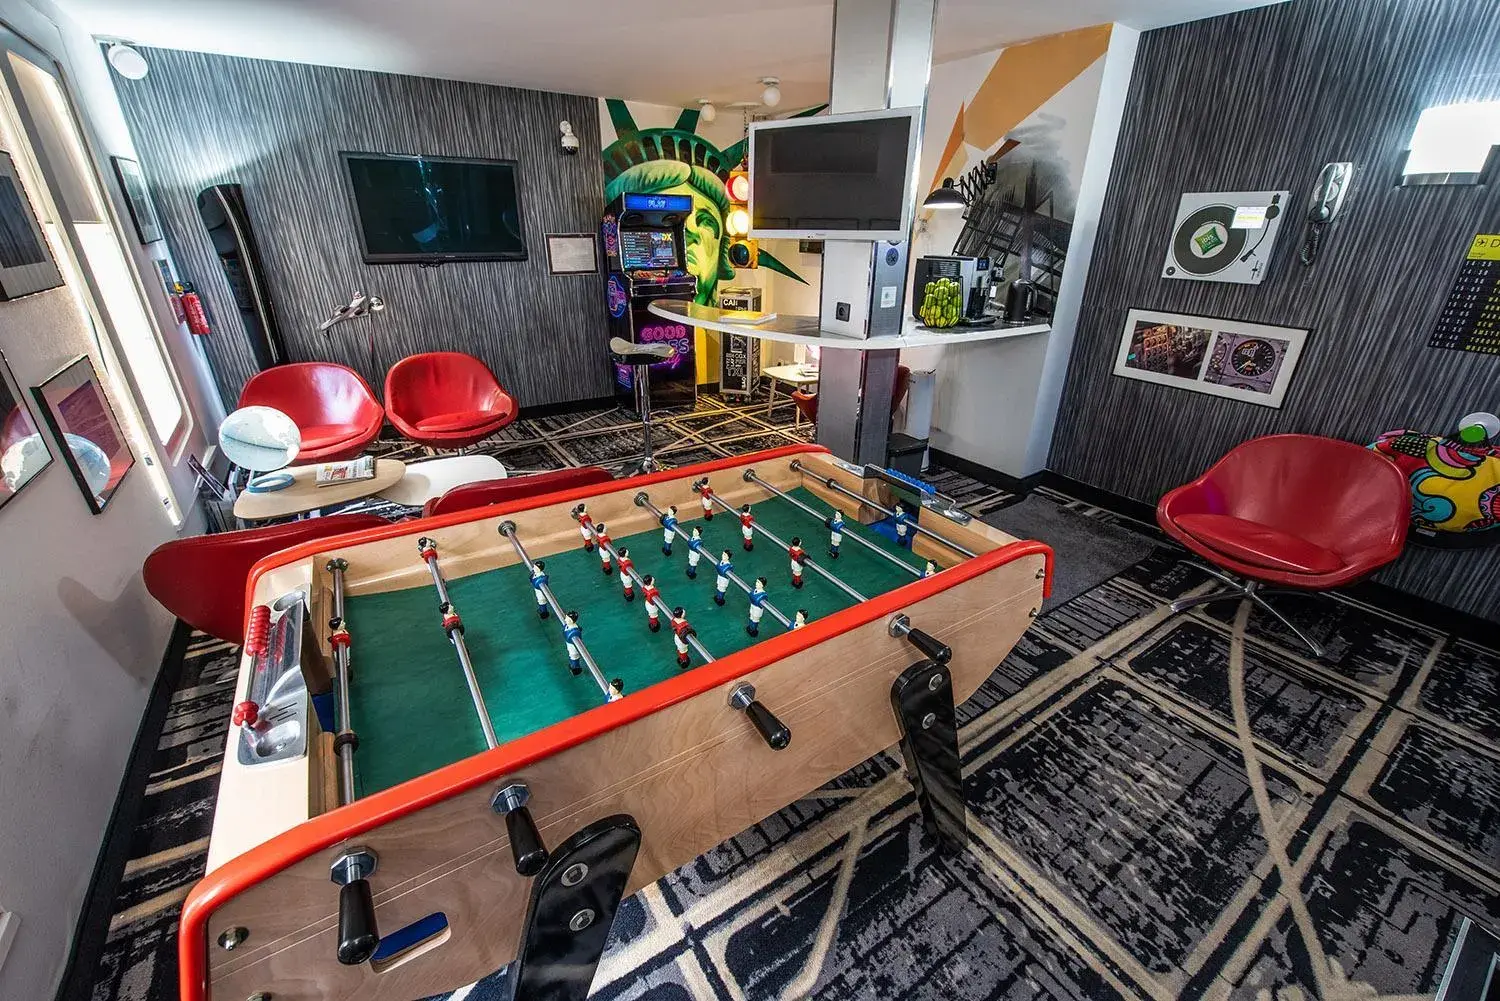 Property building, Other Activities in Ibis Styles Strasbourg Centre Gare